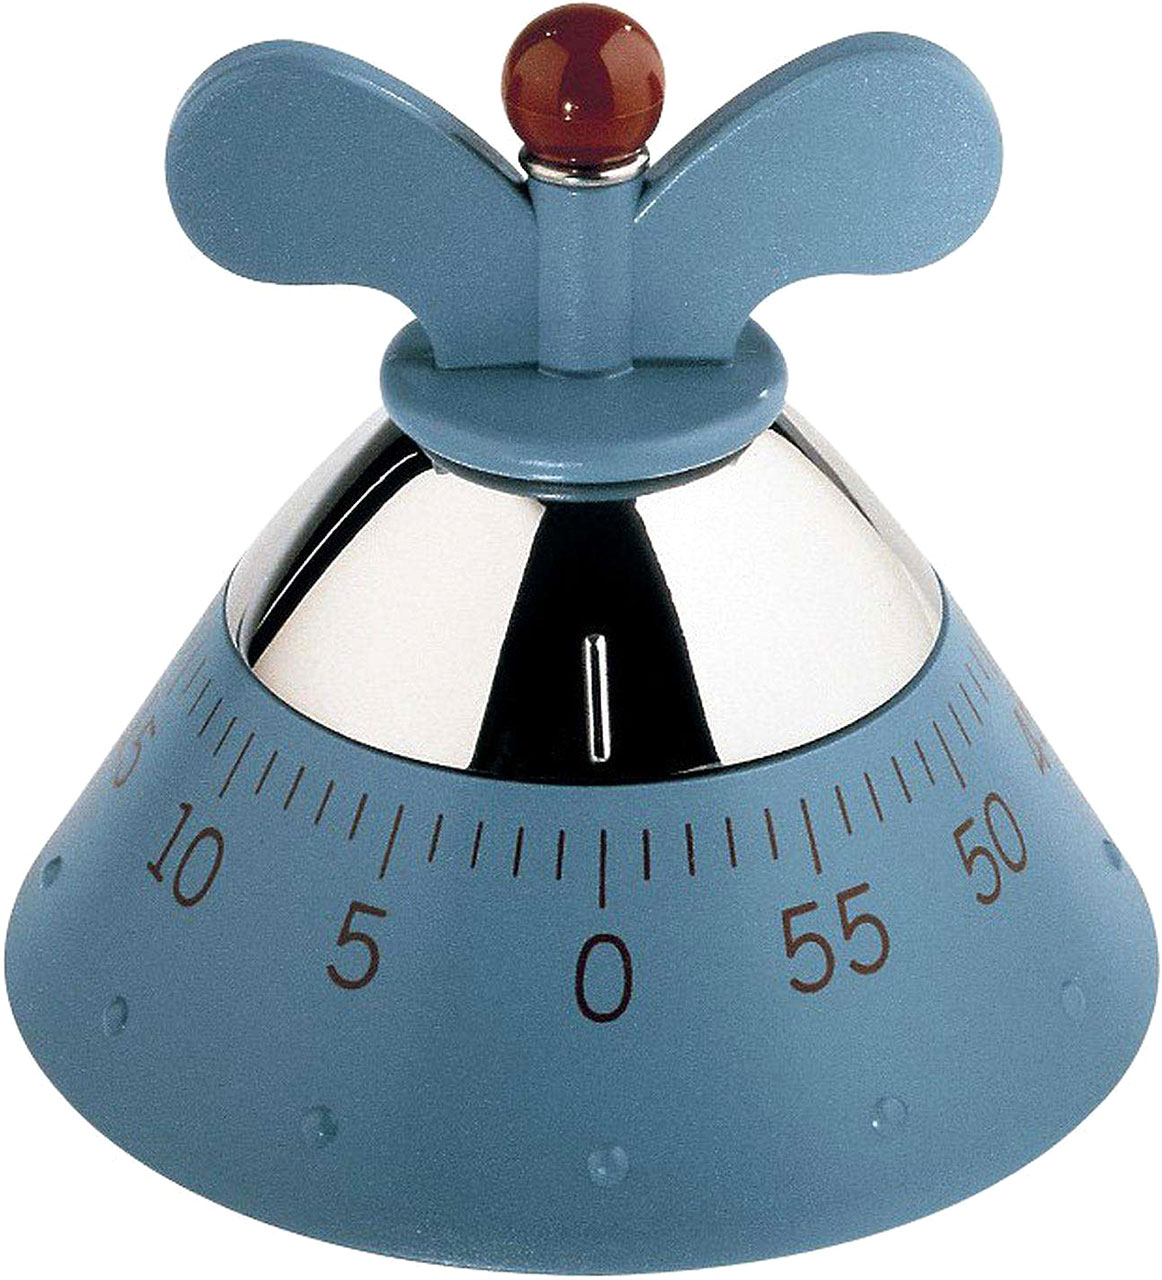 Alessi Kitchen Timer A09 by Michael Graves